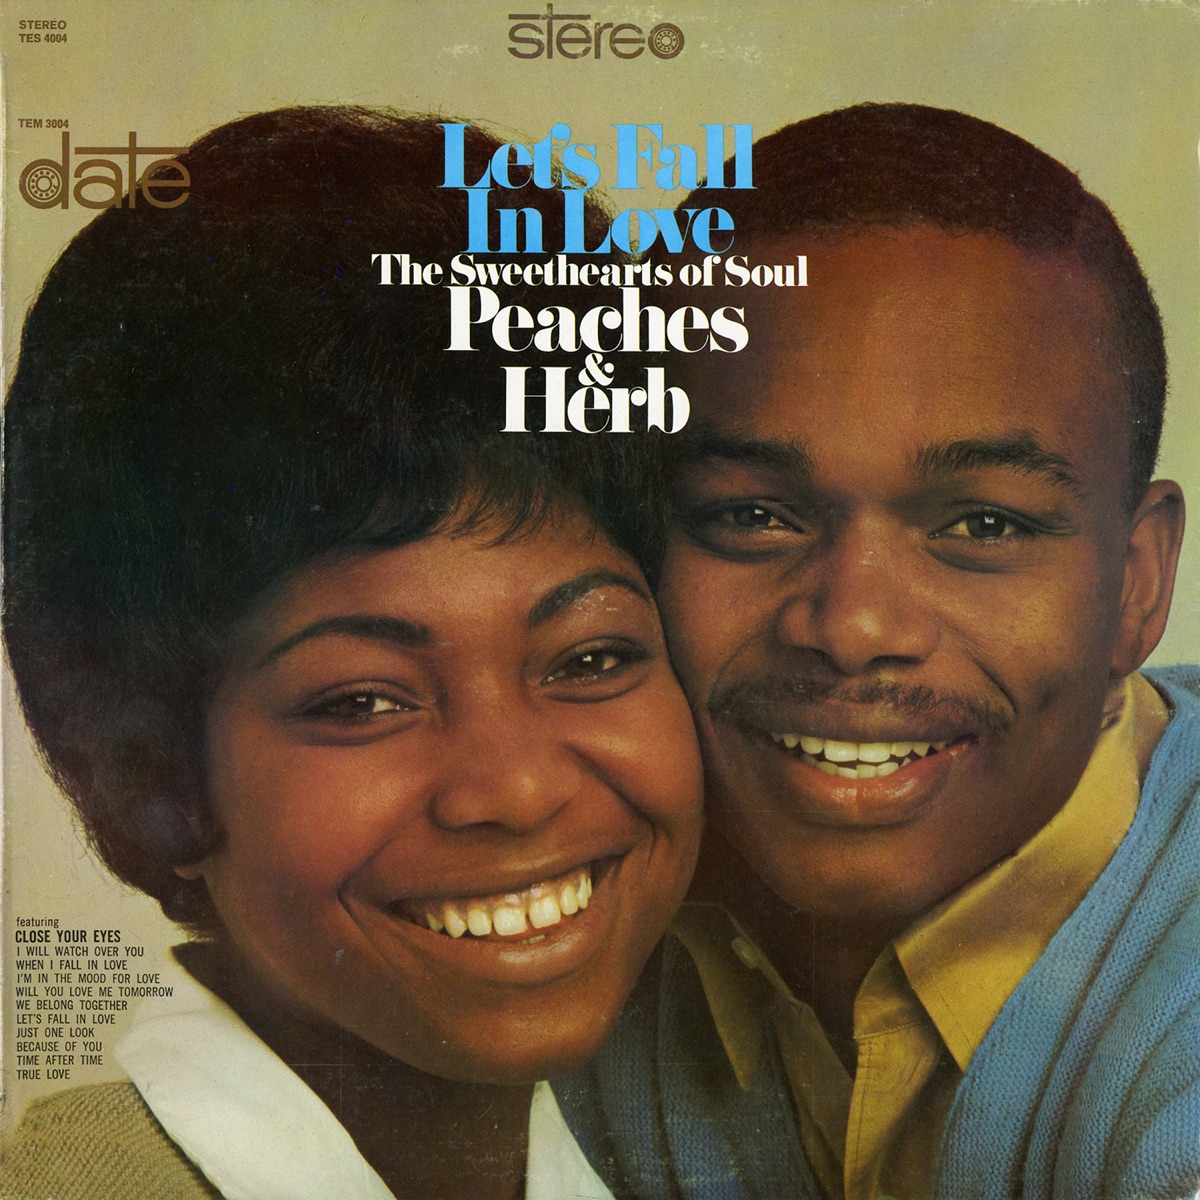 Peaches And Herb (We'll Be) United Philly Soul 